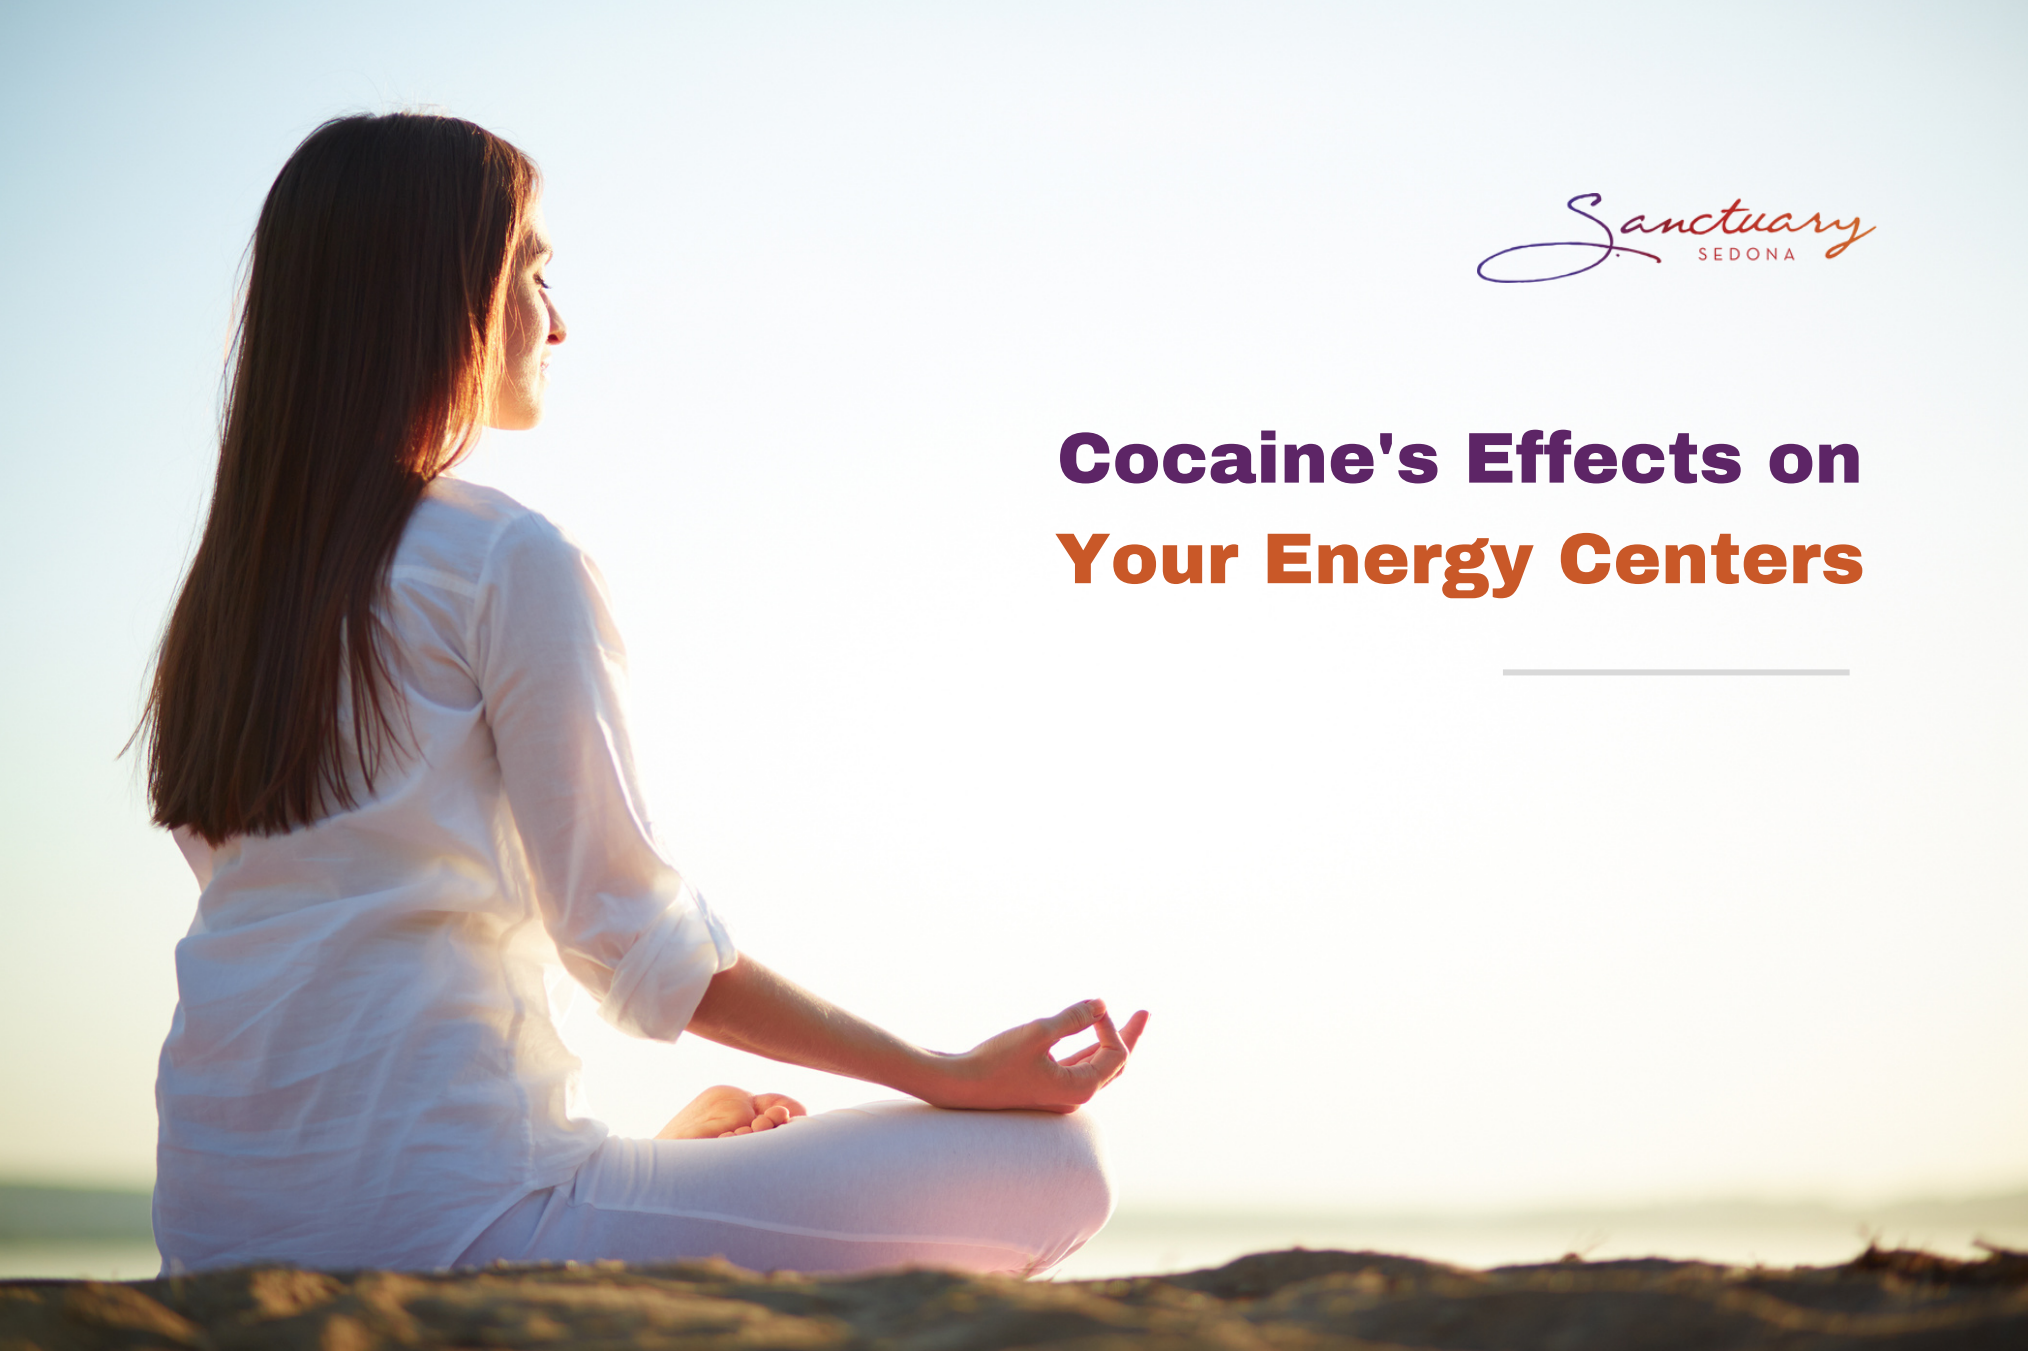 Cocaine’s Effects On Your Energy Centers